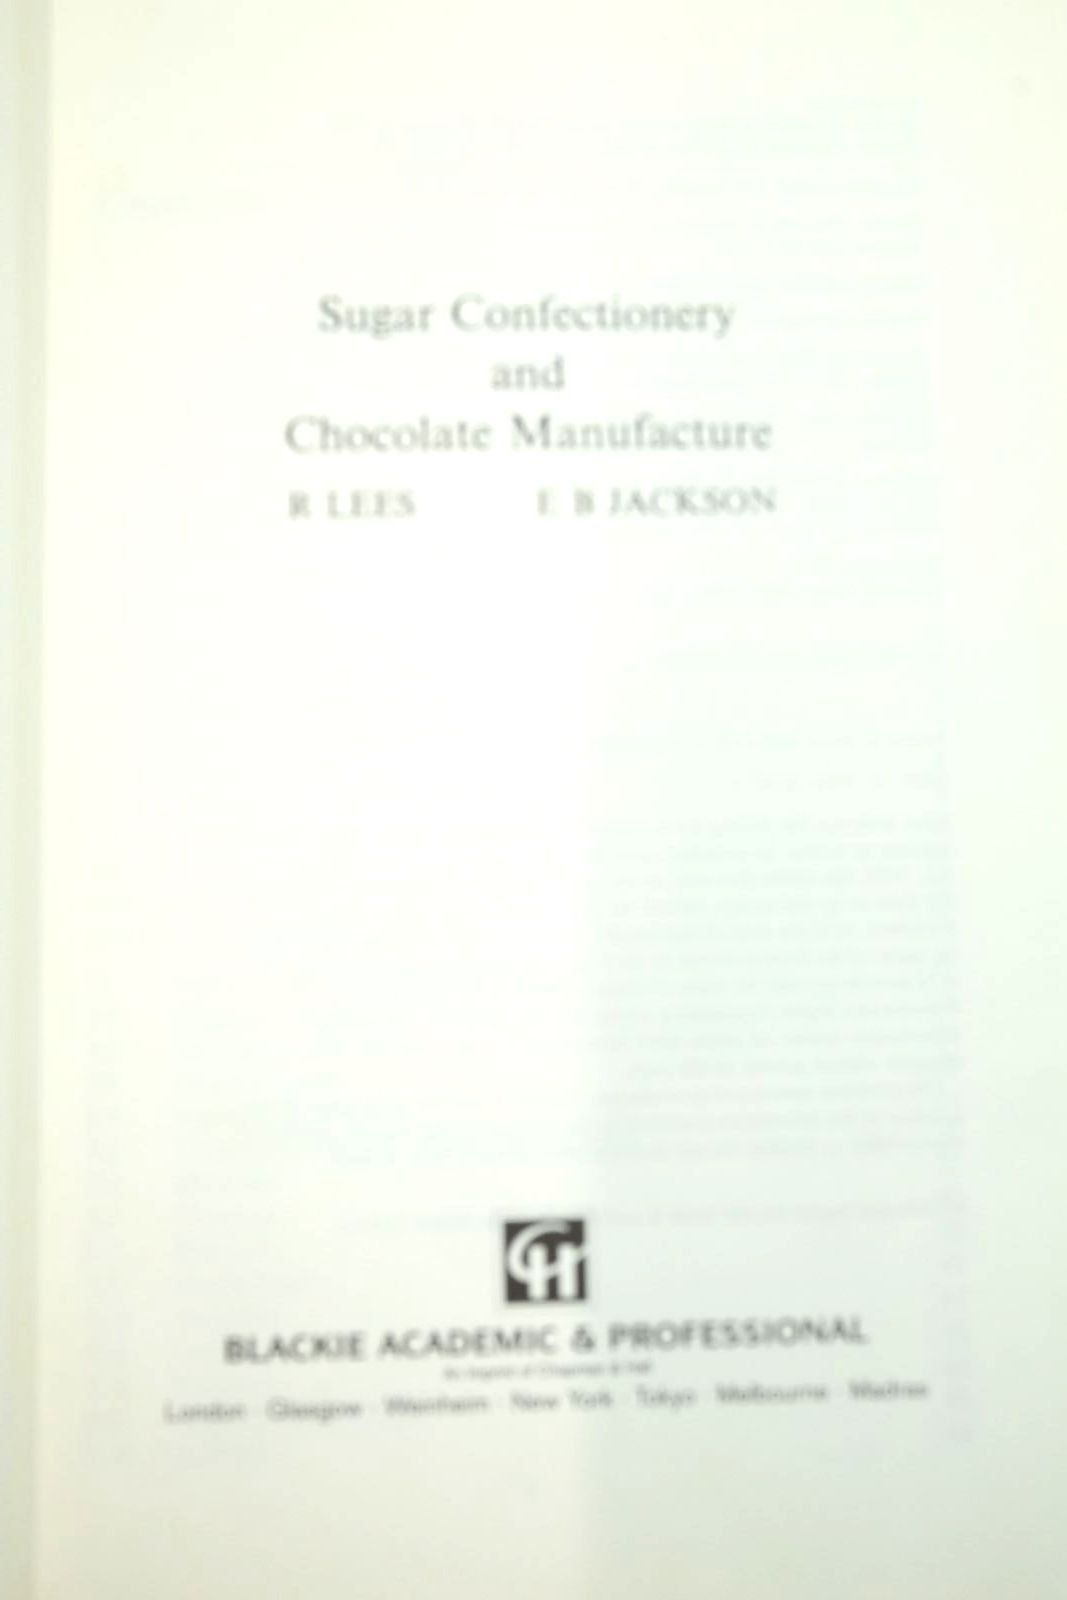 Photo of SUGAR CONFECTIONARY AND CHOCOLATE MANUFACTURE written by Lees, R.
Jackson, E.B. published by Blackie Academic & Professional (STOCK CODE: 2136826)  for sale by Stella & Rose's Books